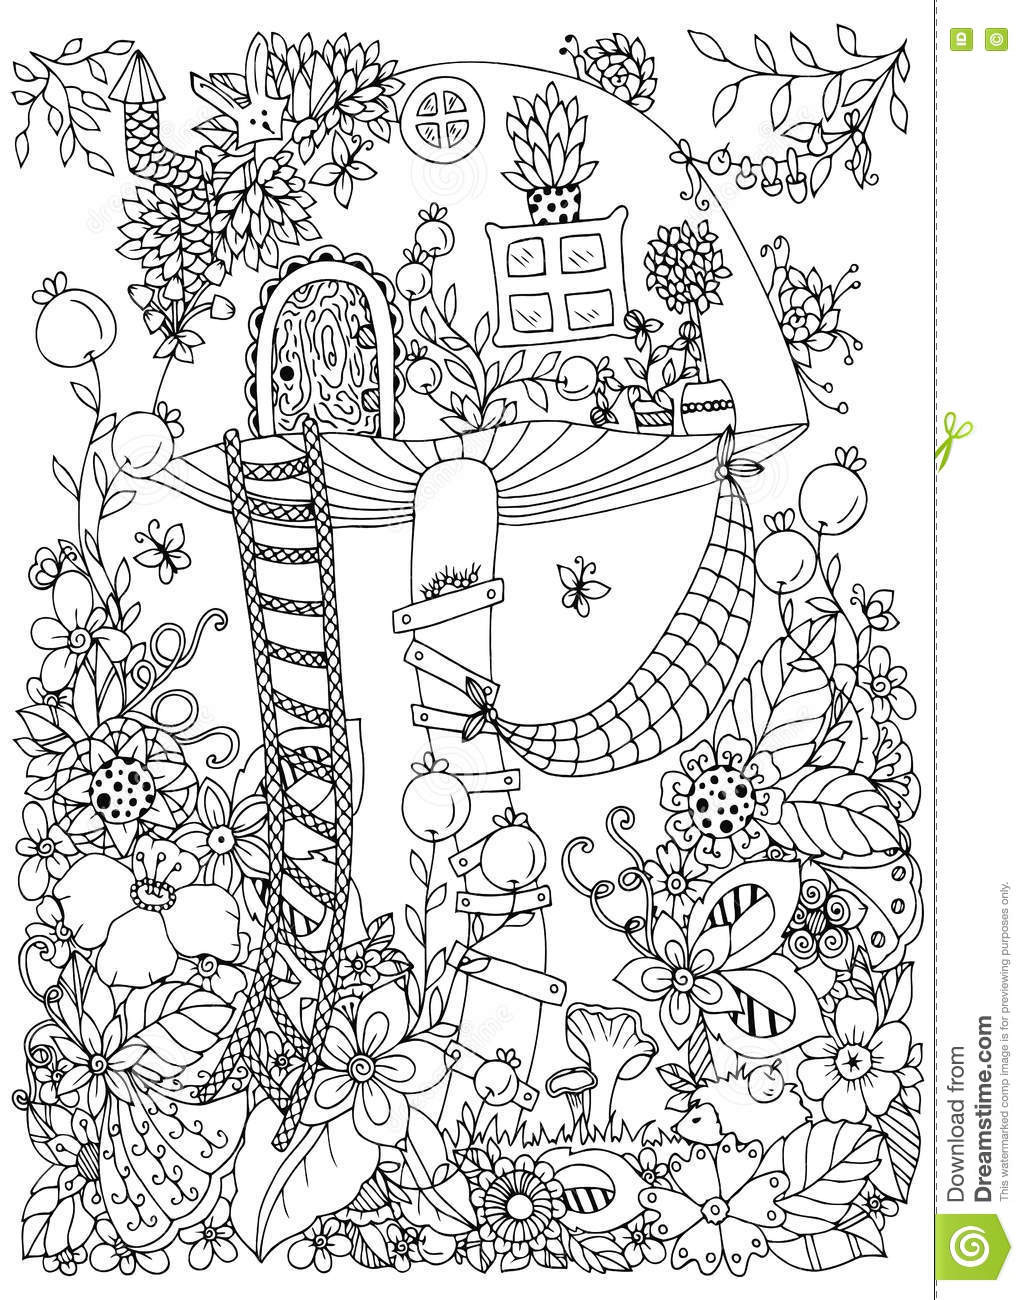 Forest Coloring Pages For Adults
 Vector Illustration Zen Tangle Doodle House The Fungus